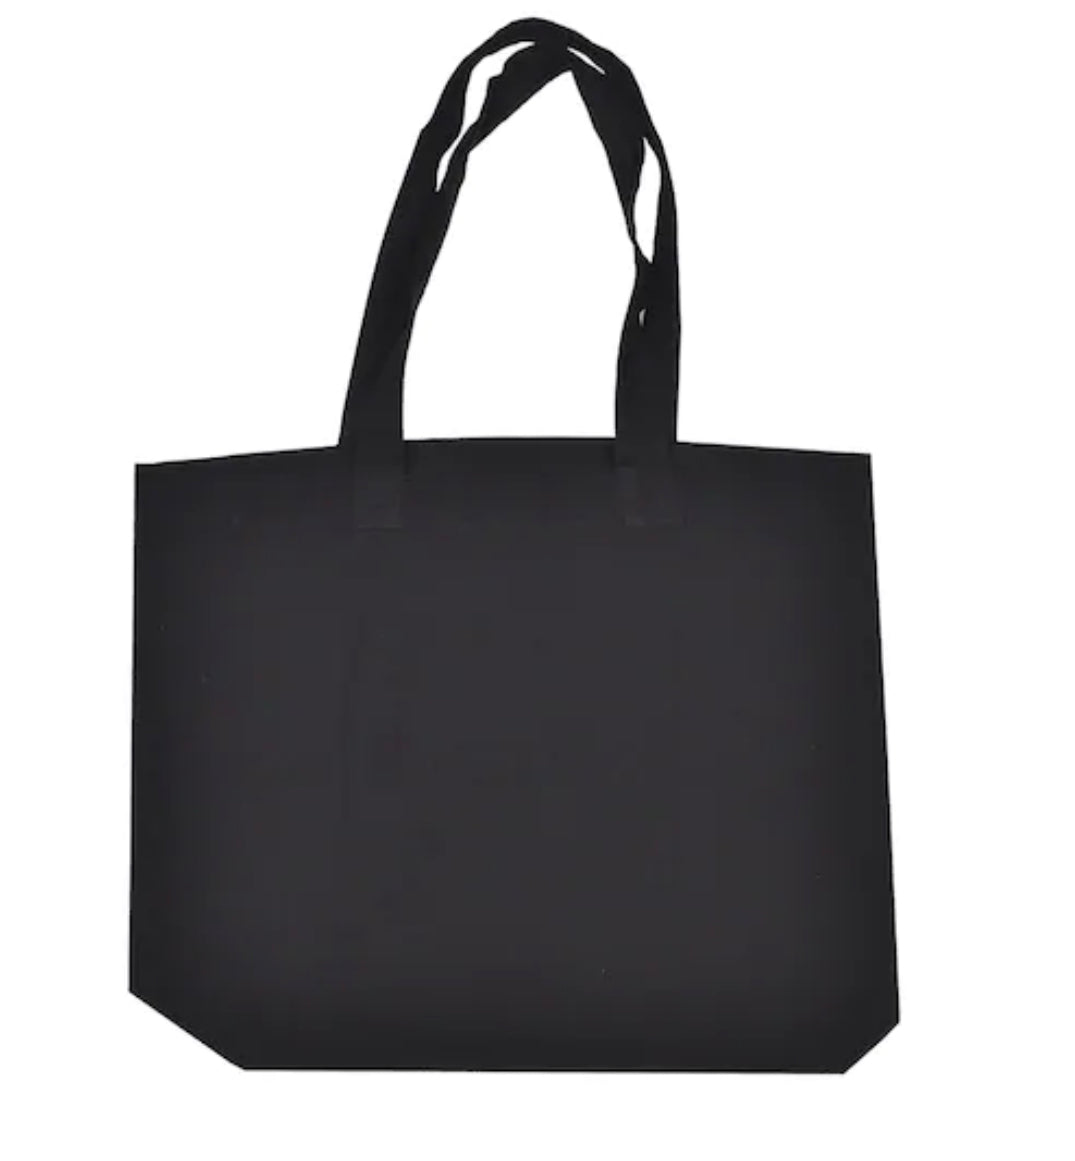 The Svssy Way Tote Bag